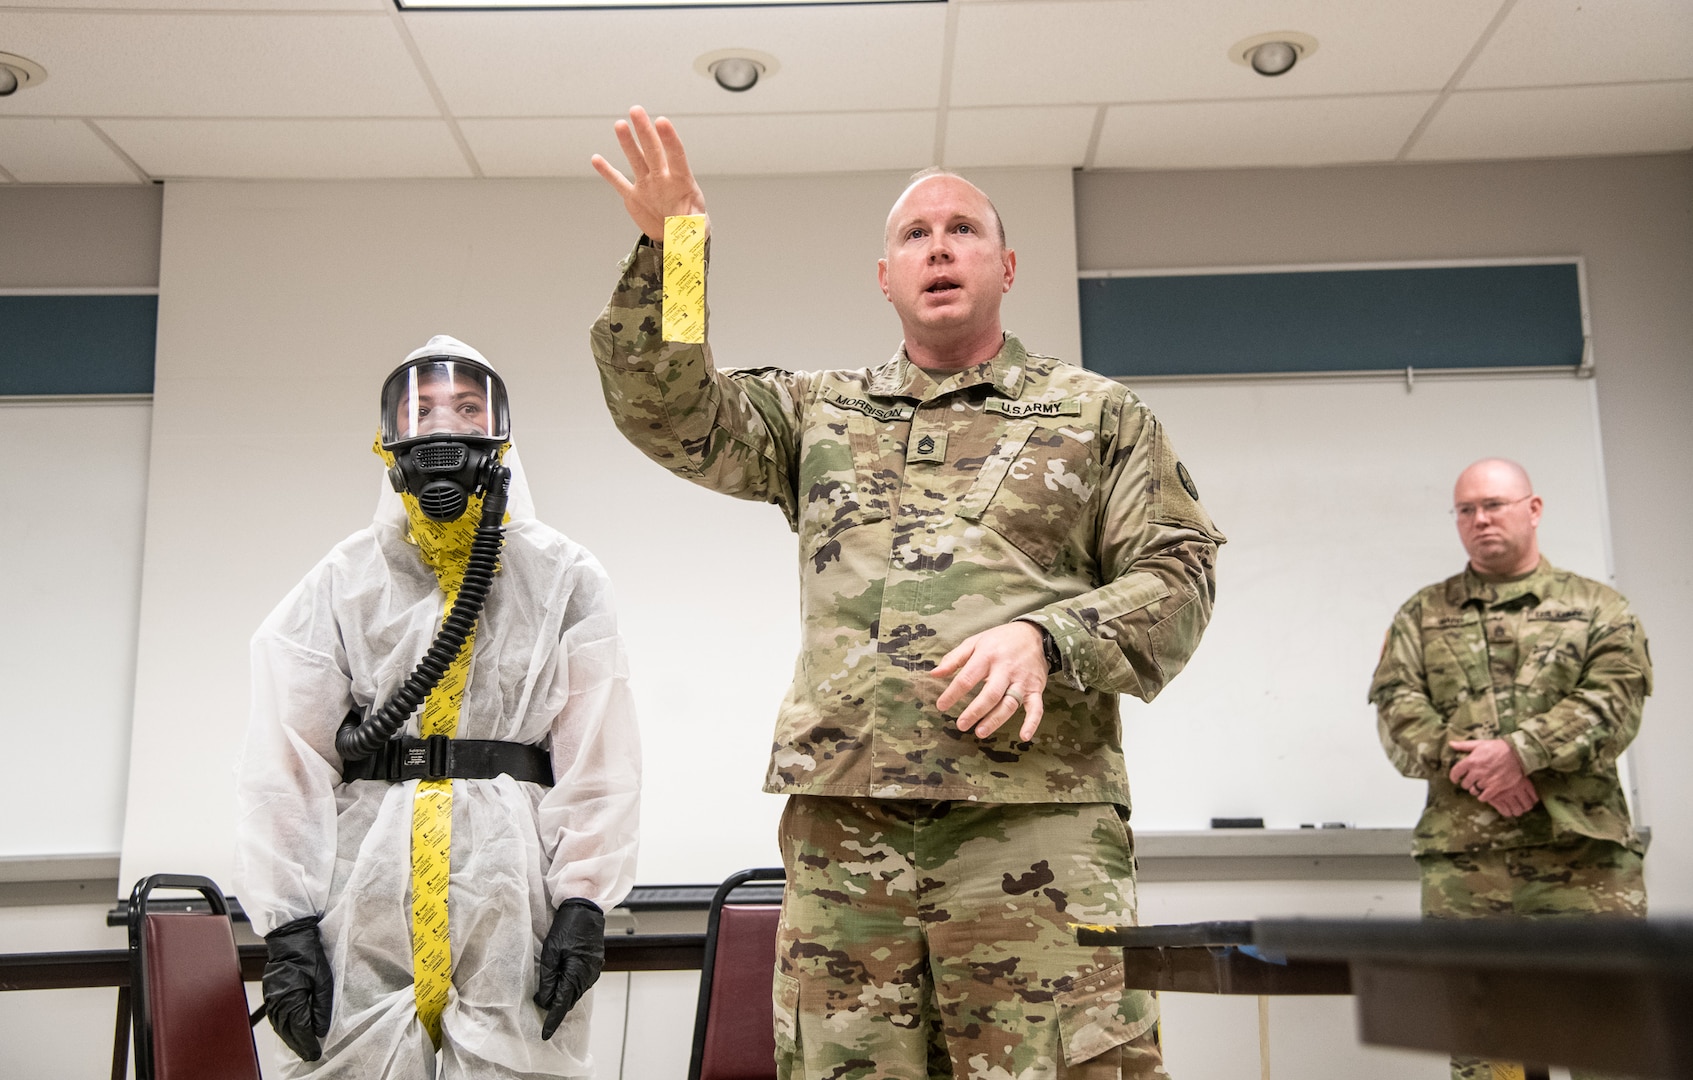 Photo caption for attached images: Members of the West Virginia National Guard's (WVNG) Chemical, Biological, Radiological, Nuclear and High Yield Explosive (CBRNE) Battalion, 35th Civil Support Team (CST) and the 35th CBRN Enhanced Response Force Package (CERFP) provide hands-on personal protective equipment (PPE) instruction to members of first responder agencies from Kentucky and West Virginia, March 16, 2020, in Huntington, W.Va. The just-in-time training was conducted in order to educate first responders on how to minimize cross-contamination through the proper wear of, “donning” and the procedures for “doffing” PPE. (U.S. Army National Guard photo by Edwin L. Wriston)